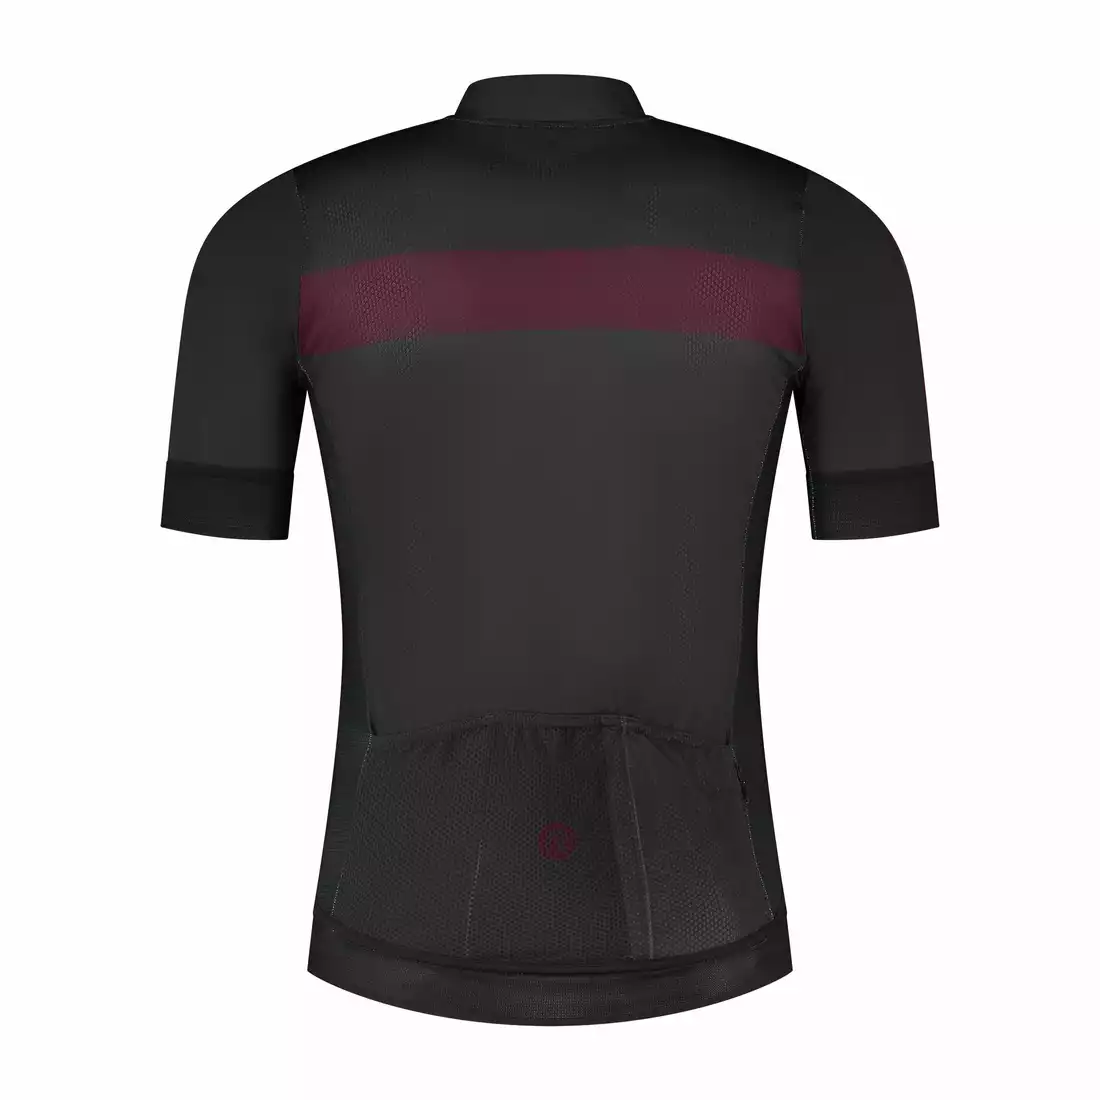 ROGELLI PRIME men's cycling jersey gray and maroon